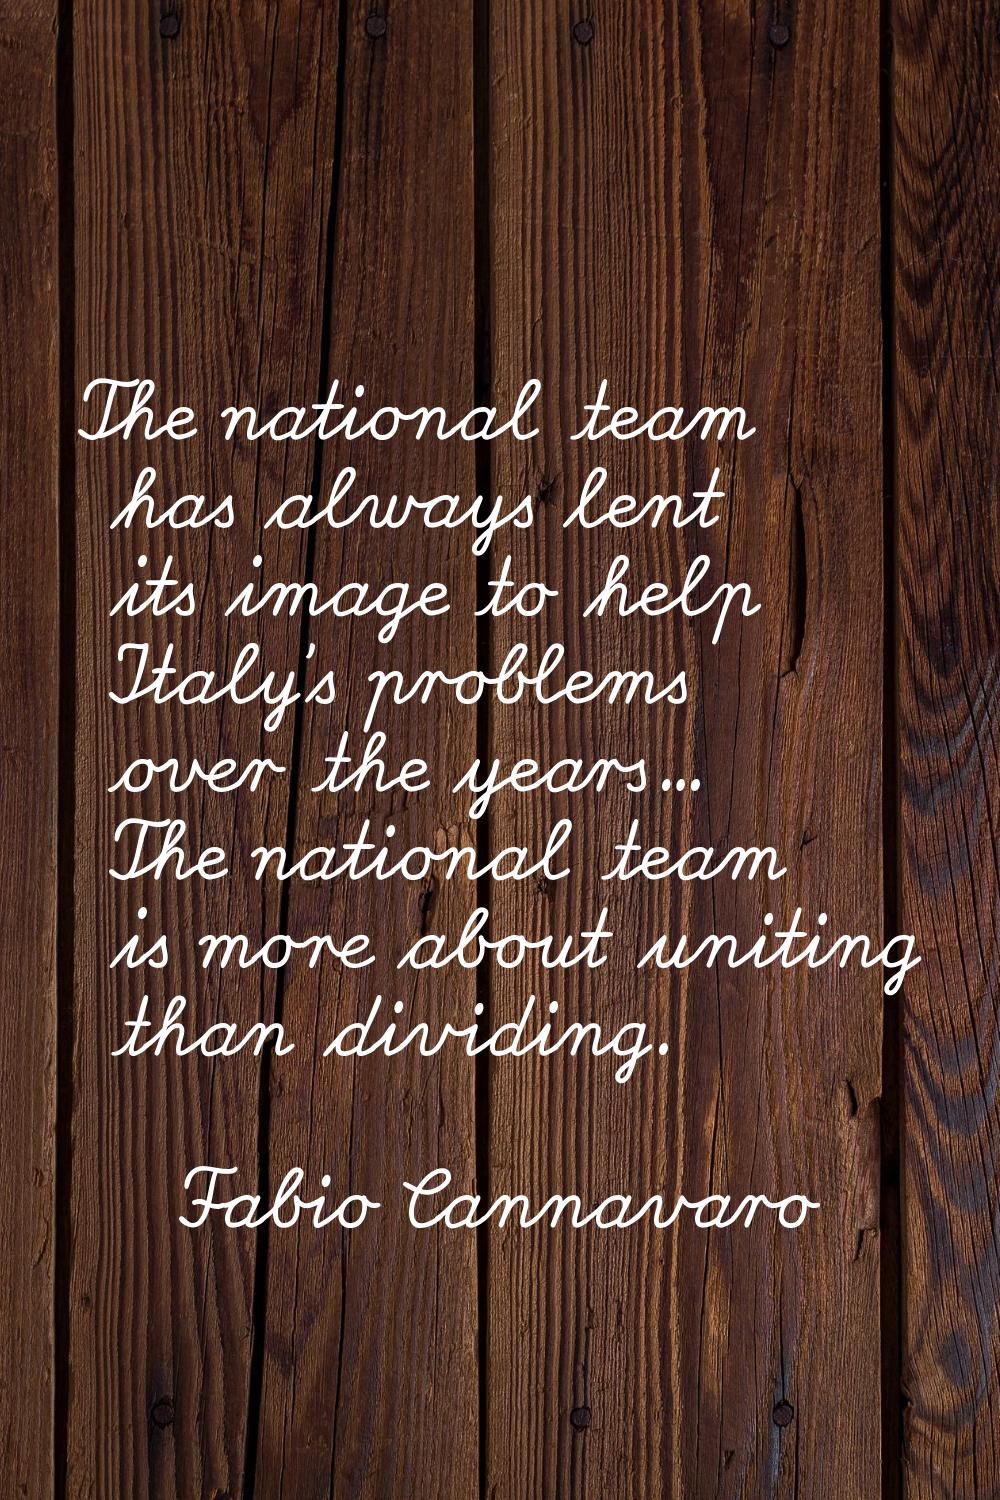 The national team has always lent its image to help Italy's problems over the years... The national